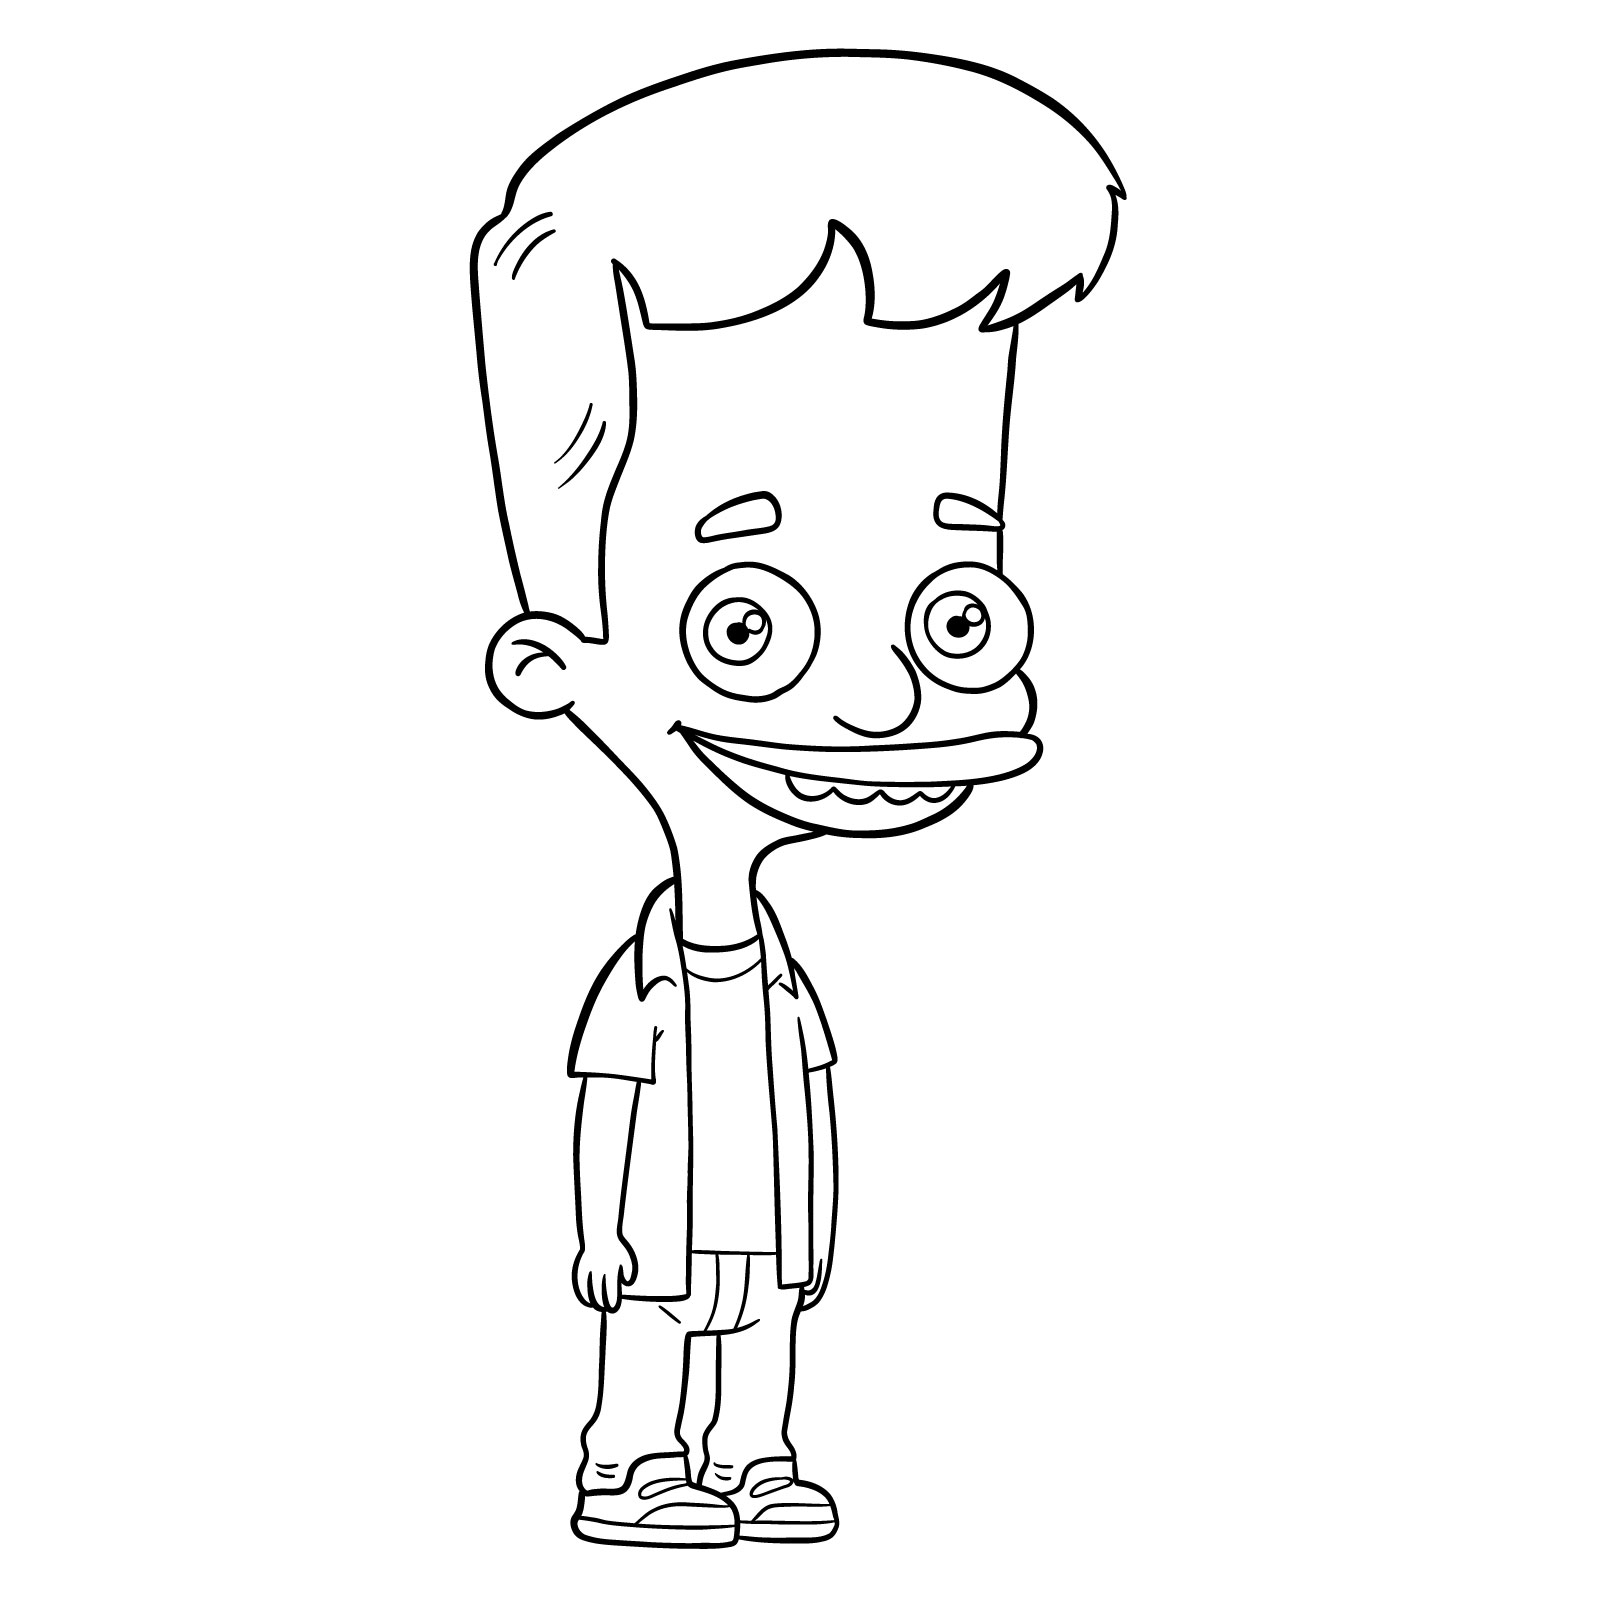 How to draw Nick Birch from Big Mouth - final step